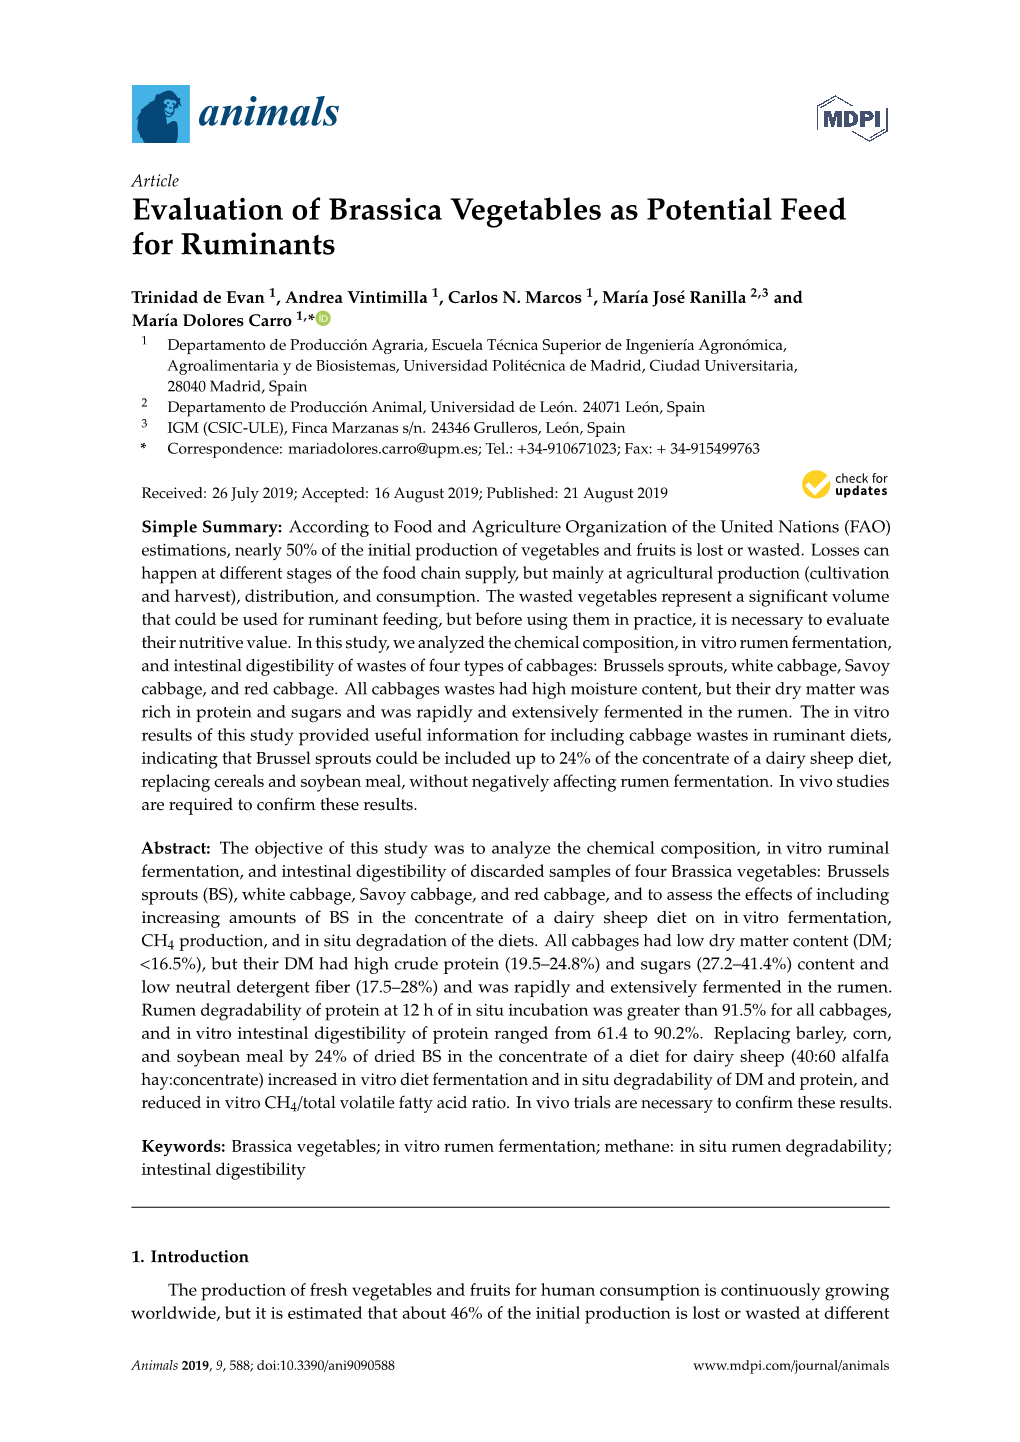 Evaluation of Brassica Vegetables As Potential Feed for Ruminants